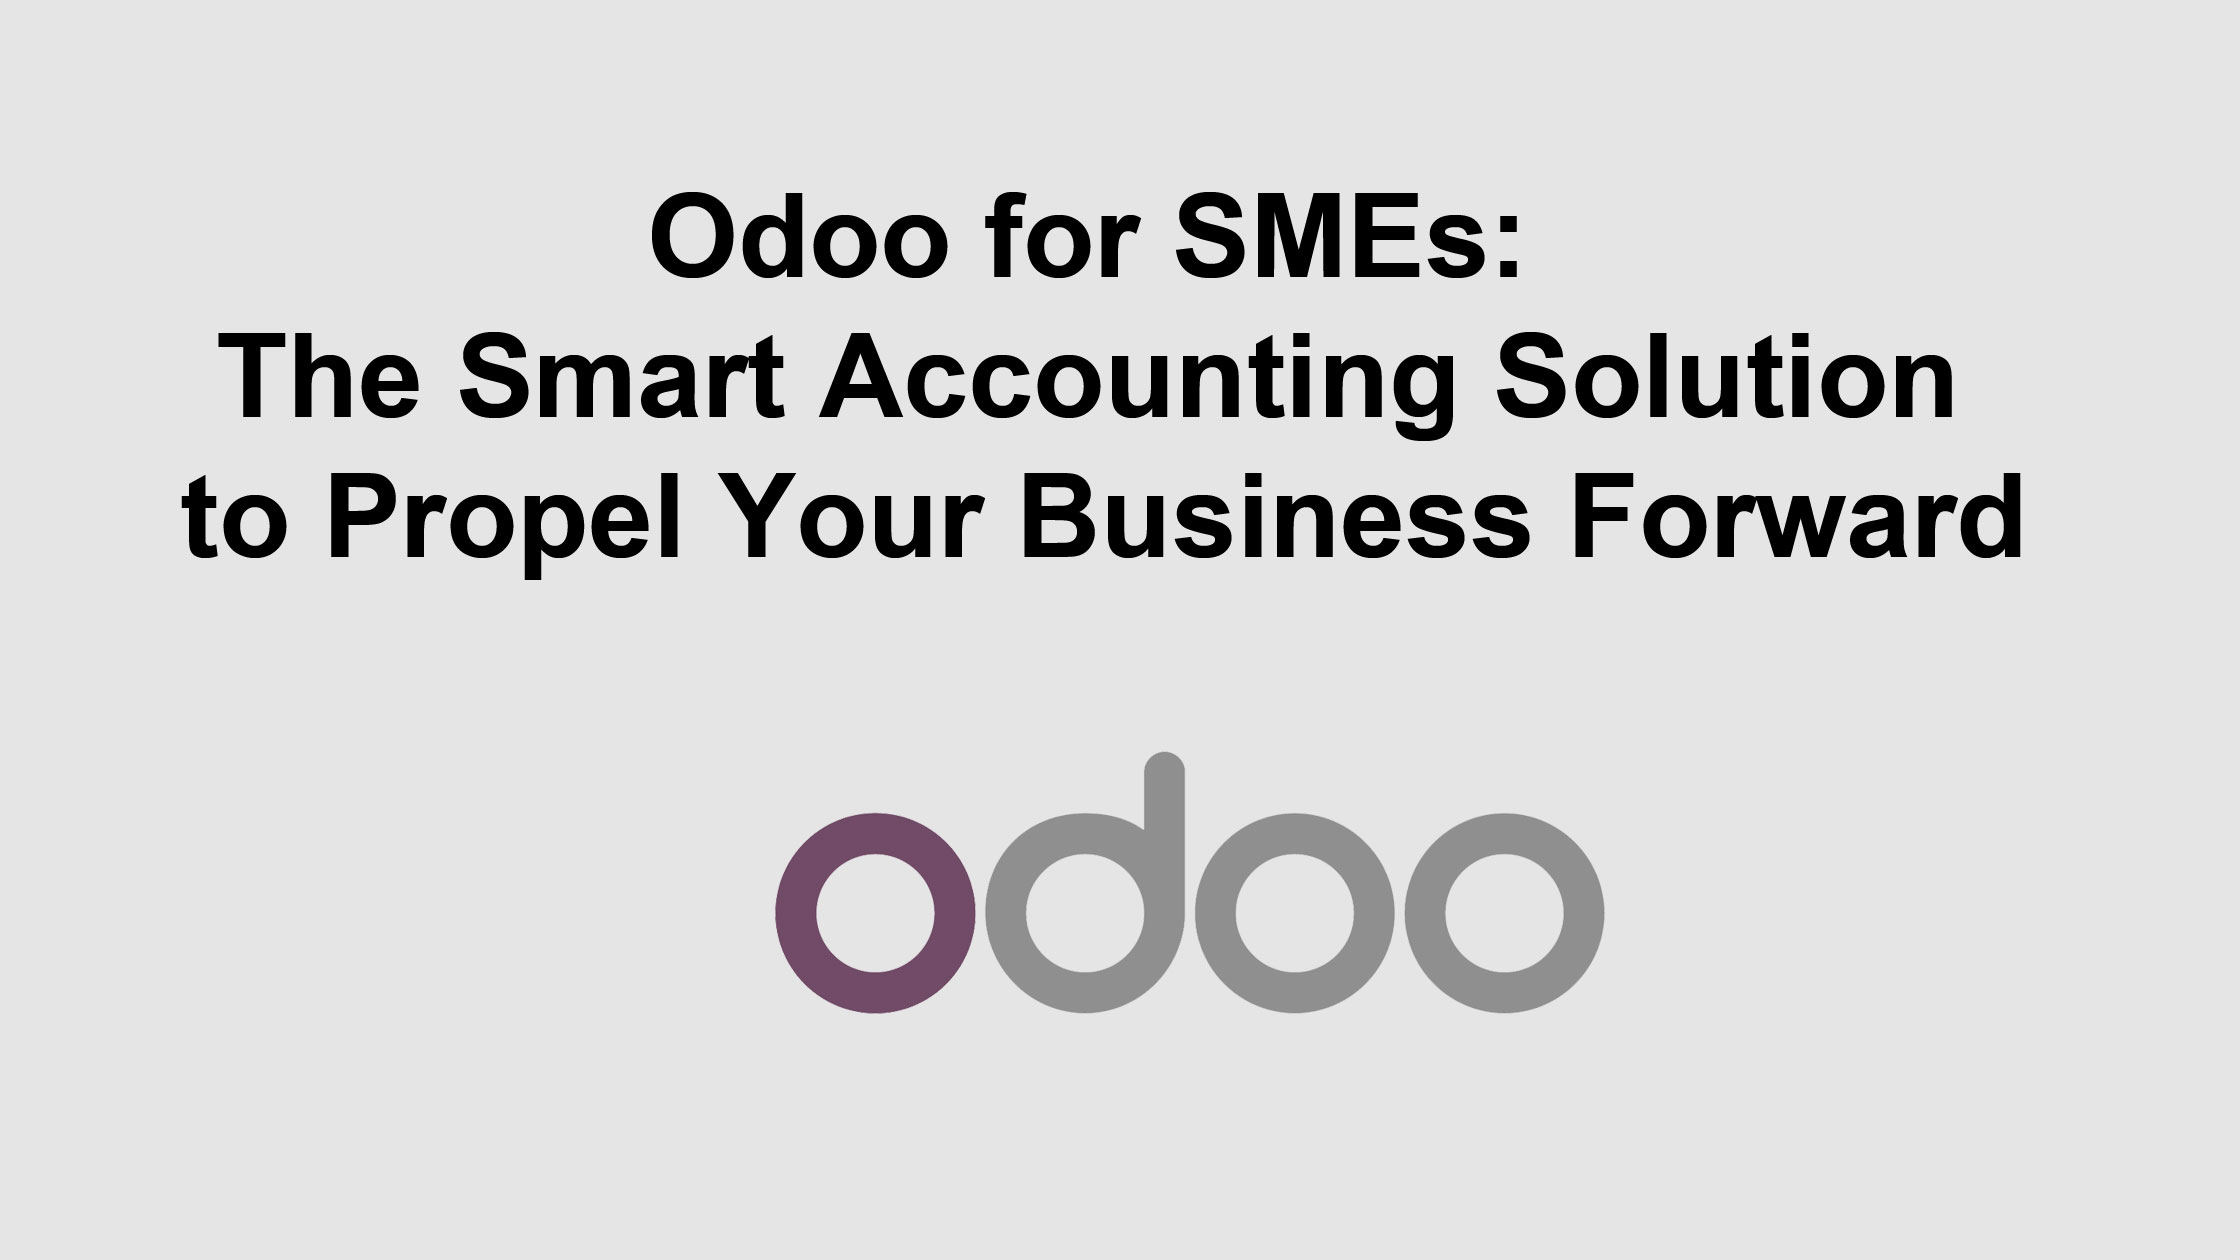 Odoo for SMEs: The Smart Accounting Solution to Propel Your Business Forward